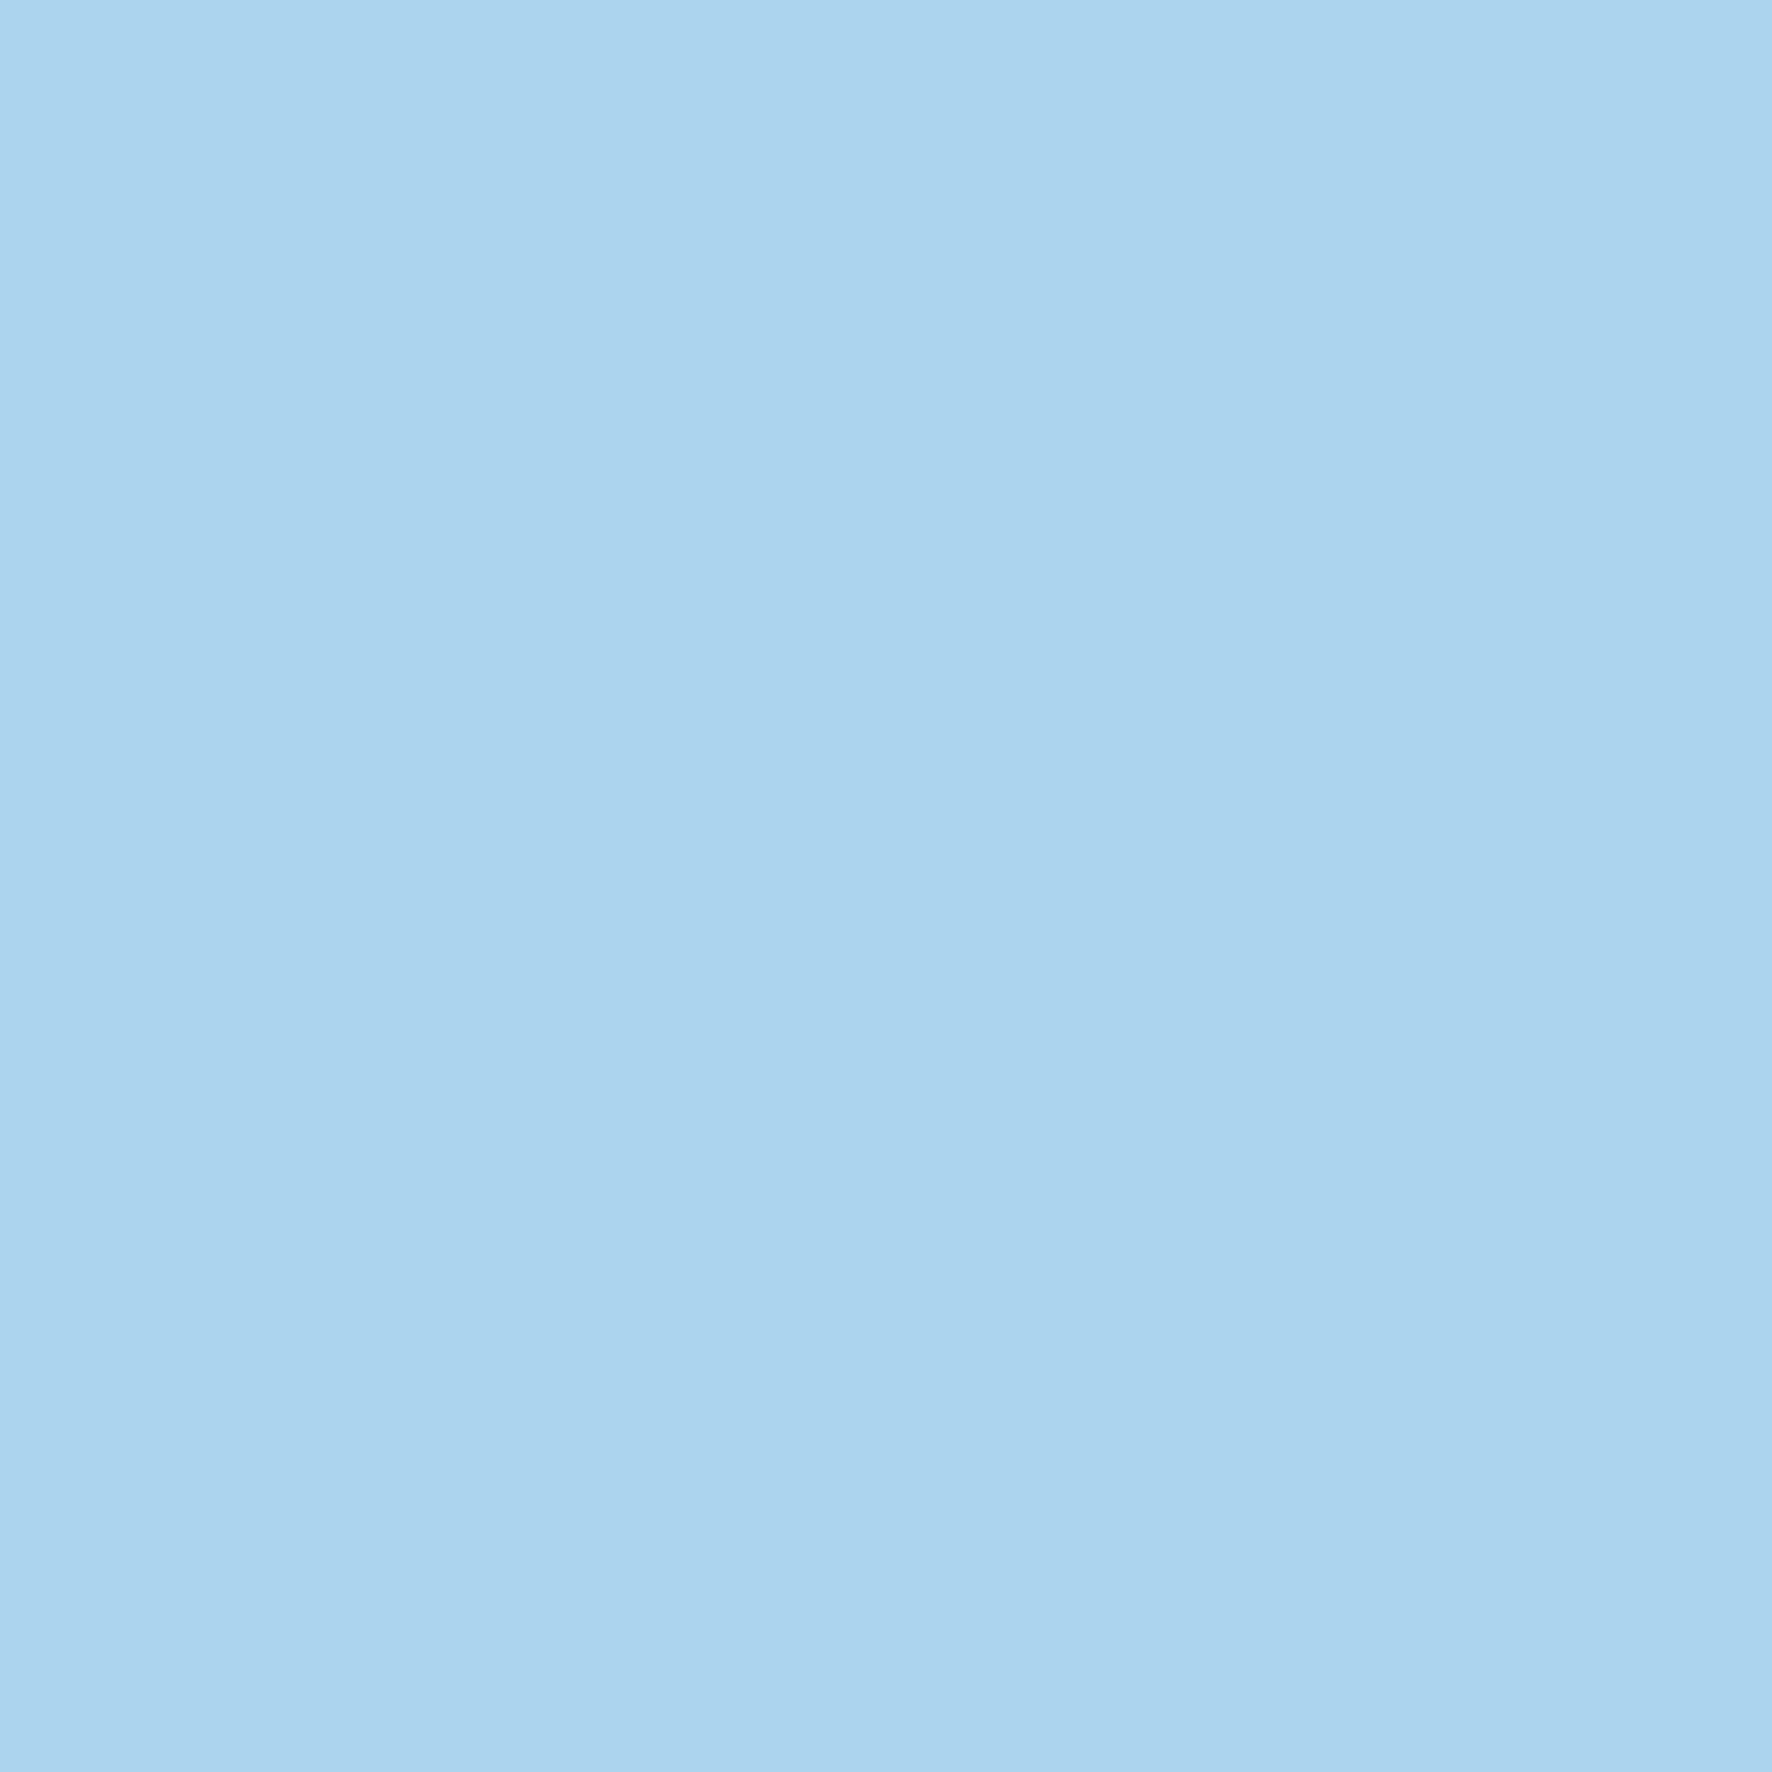 [1617775] Image A4 160g pale icyblue 250